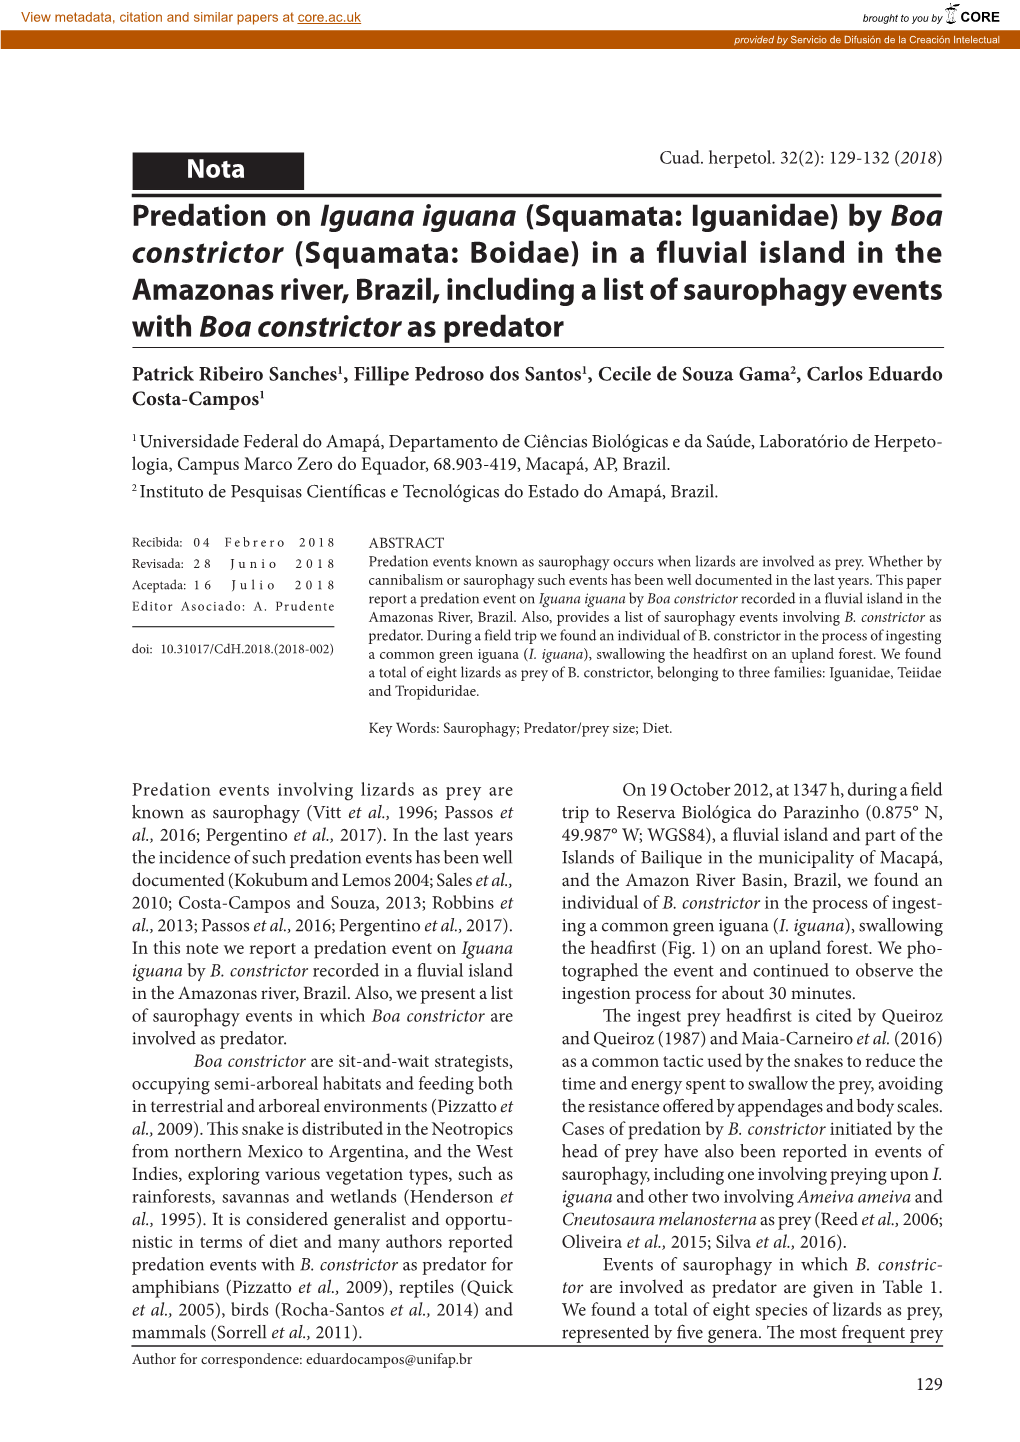 By Boa Constrictor (Squamata: Boidae) in a Fluvial Island in the Amazonas River, Brazil, Including a List of Saurophagy Events with Boa Constrictor As Predator